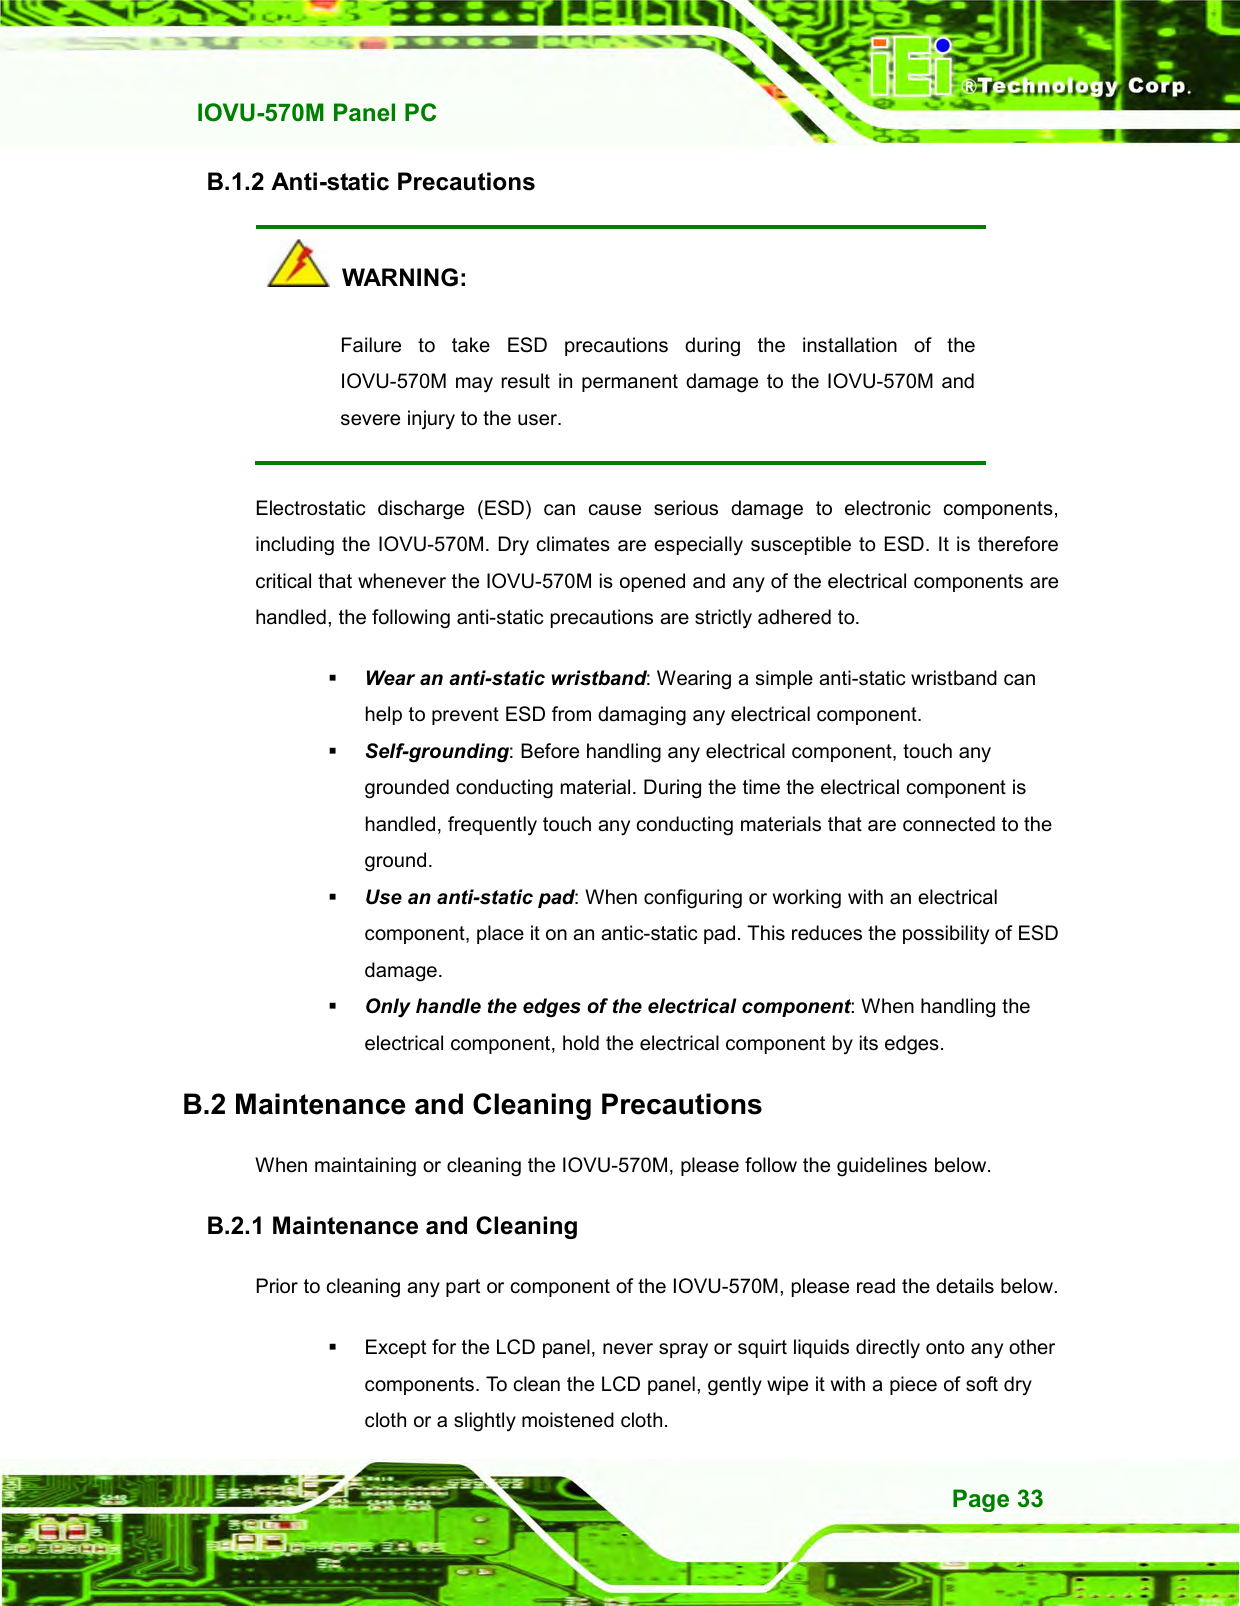   IOVU-570M Panel PC Page 33 B.1.2 Anti-static Precautions   WARNING: Failure  to  take  ESD  precautions  during  the  installation  of  the IOVU-570M may result in permanent  damage to the IOVU-570M and severe injury to the user.   Electrostatic  discharge  (ESD)  can  cause  serious  damage  to  electronic  components, including the IOVU-570M. Dry climates are especially susceptible to ESD. It is therefore critical that whenever the IOVU-570M is opened and any of the electrical components are handled, the following anti-static precautions are strictly adhered to.  Wear an anti-static wristband: Wearing a simple anti-static wristband can help to prevent ESD from damaging any electrical component.  Self-grounding: Before handling any electrical component, touch any grounded conducting material. During the time the electrical component is handled, frequently touch any conducting materials that are connected to the ground.  Use an anti-static pad: When configuring or working with an electrical component, place it on an antic-static pad. This reduces the possibility of ESD damage.  Only handle the edges of the electrical component: When handling the electrical component, hold the electrical component by its edges. B.2 Maintenance and Cleaning Precautions When maintaining or cleaning the IOVU-570M, please follow the guidelines below. B.2.1 Maintenance and Cleaning Prior to cleaning any part or component of the IOVU-570M, please read the details below.   Except for the LCD panel, never spray or squirt liquids directly onto any other components. To clean the LCD panel, gently wipe it with a piece of soft dry cloth or a slightly moistened cloth. 